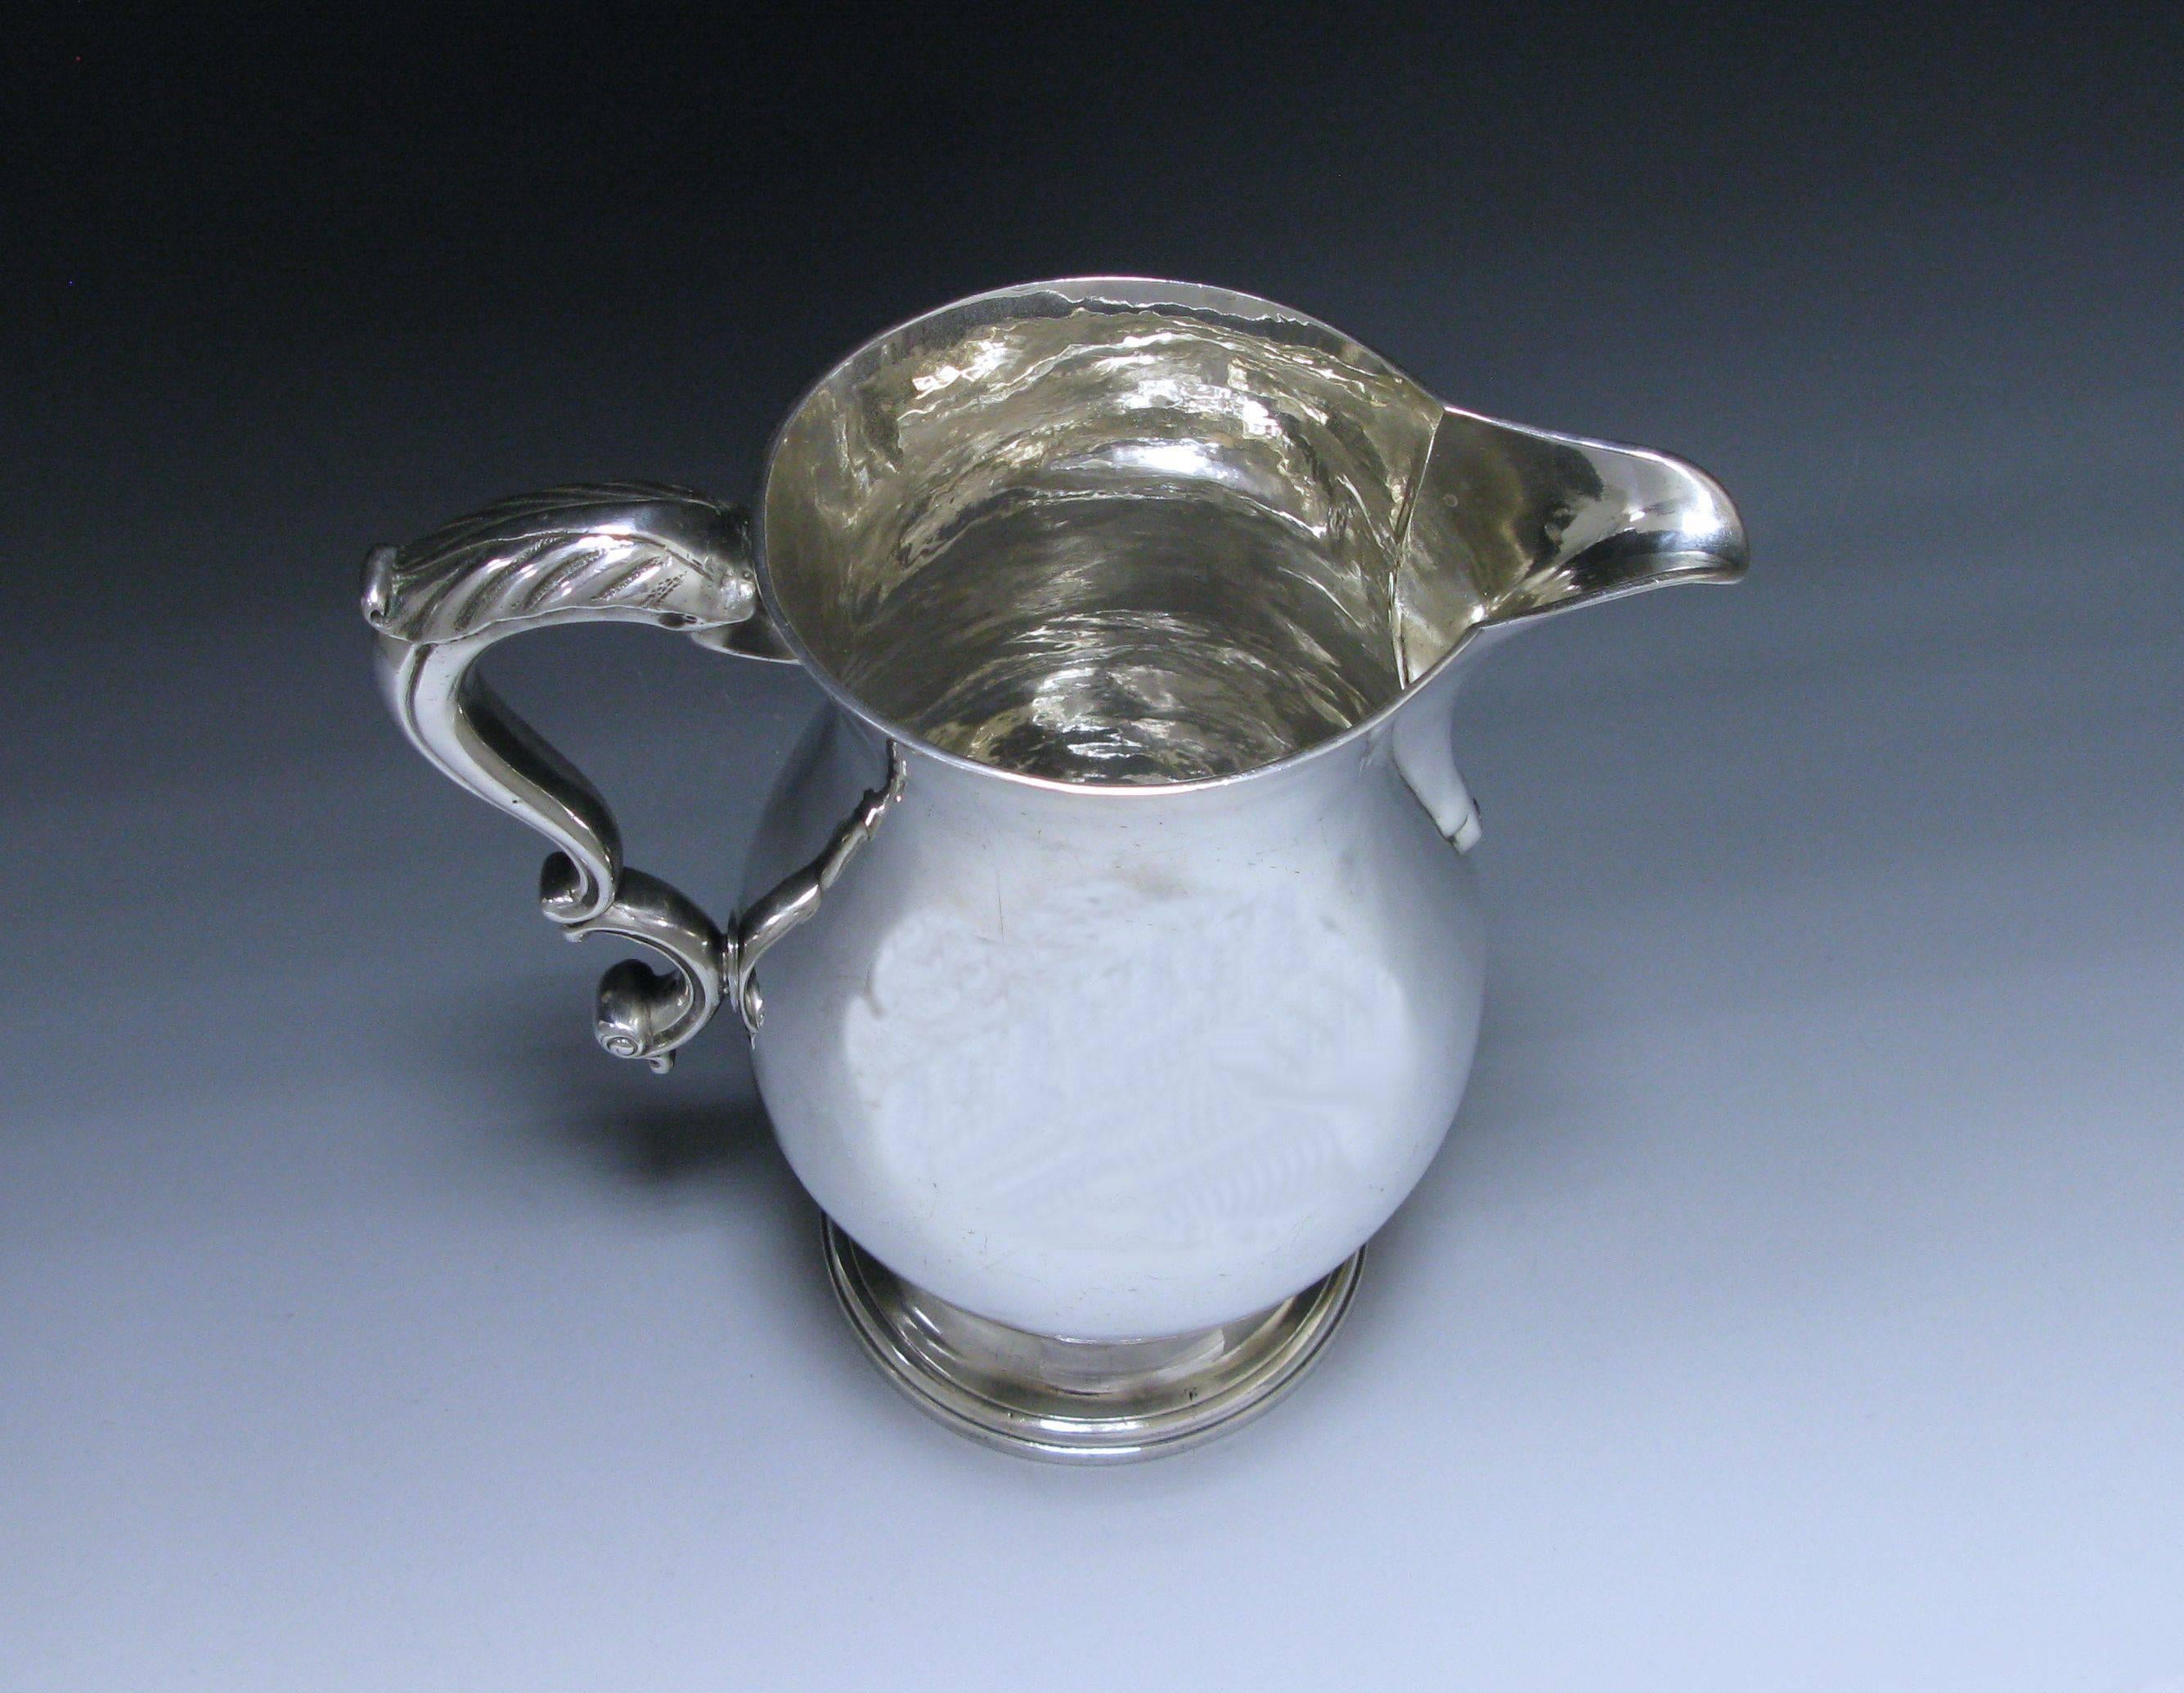 A magnificent antique George III sterling silver beer / water jug is of plain baluster form onto a circular spreading foot. The jug has a cast sterling silver S scroll handle ornamented with a scrolling leaf design. The beak style spout is